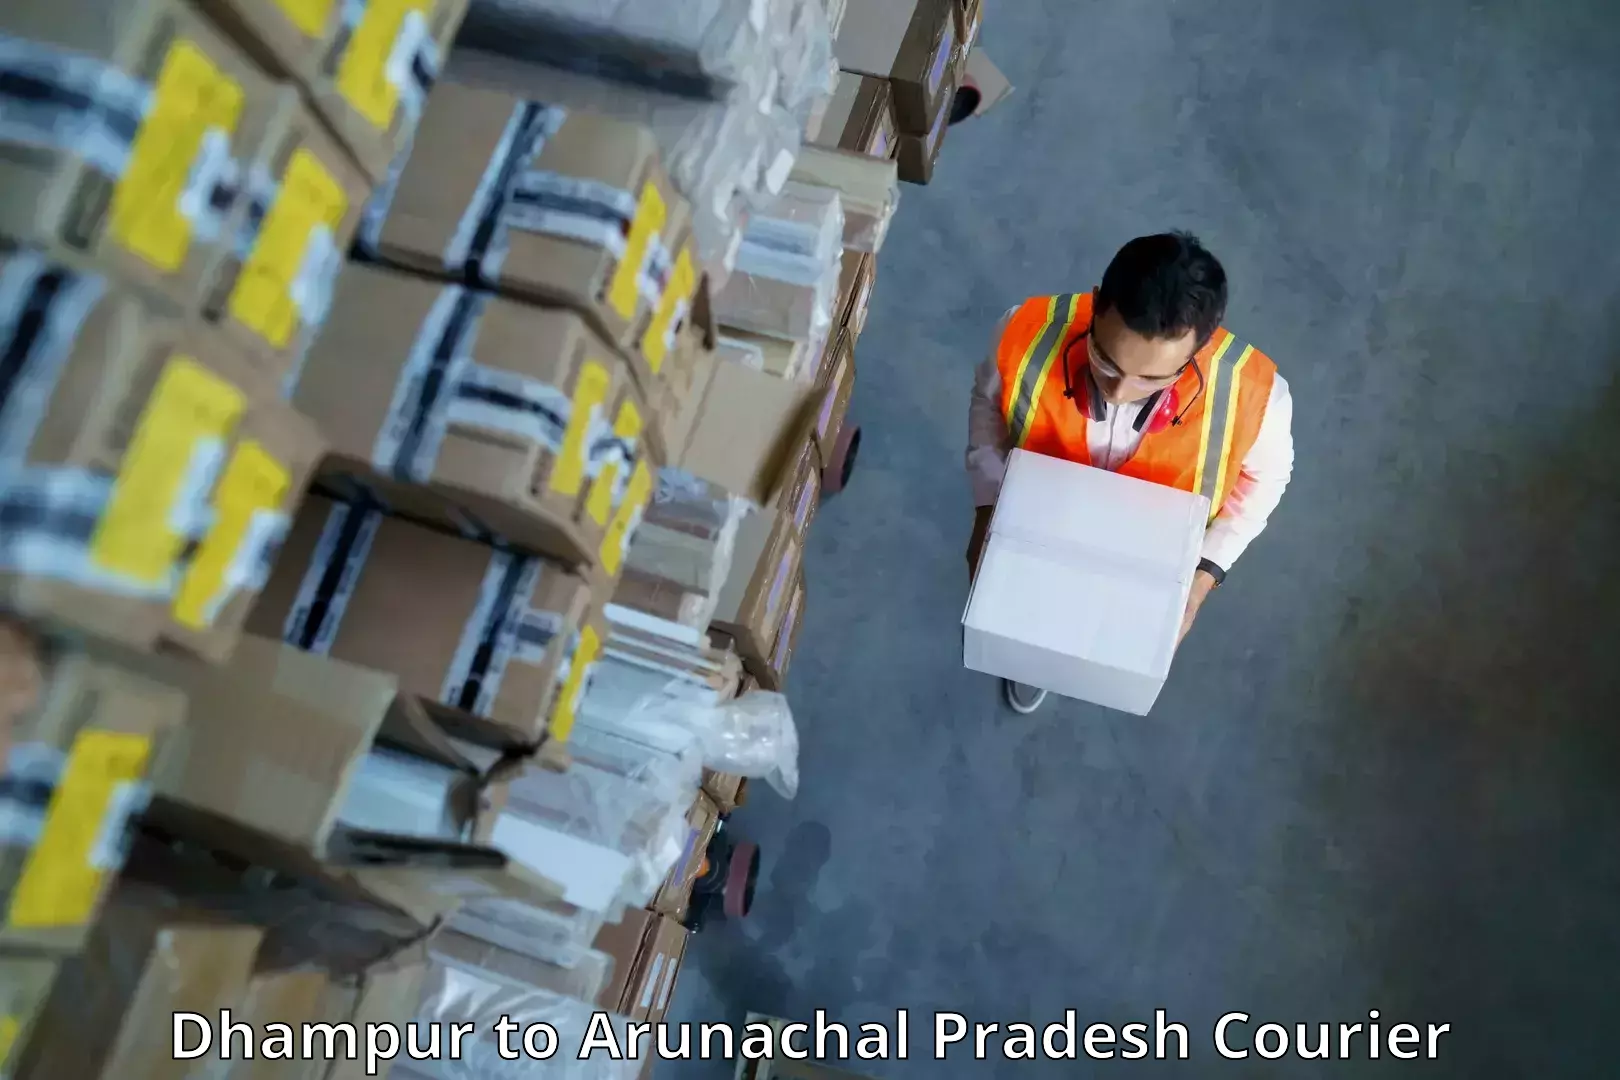 Express delivery capabilities Dhampur to Arunachal Pradesh